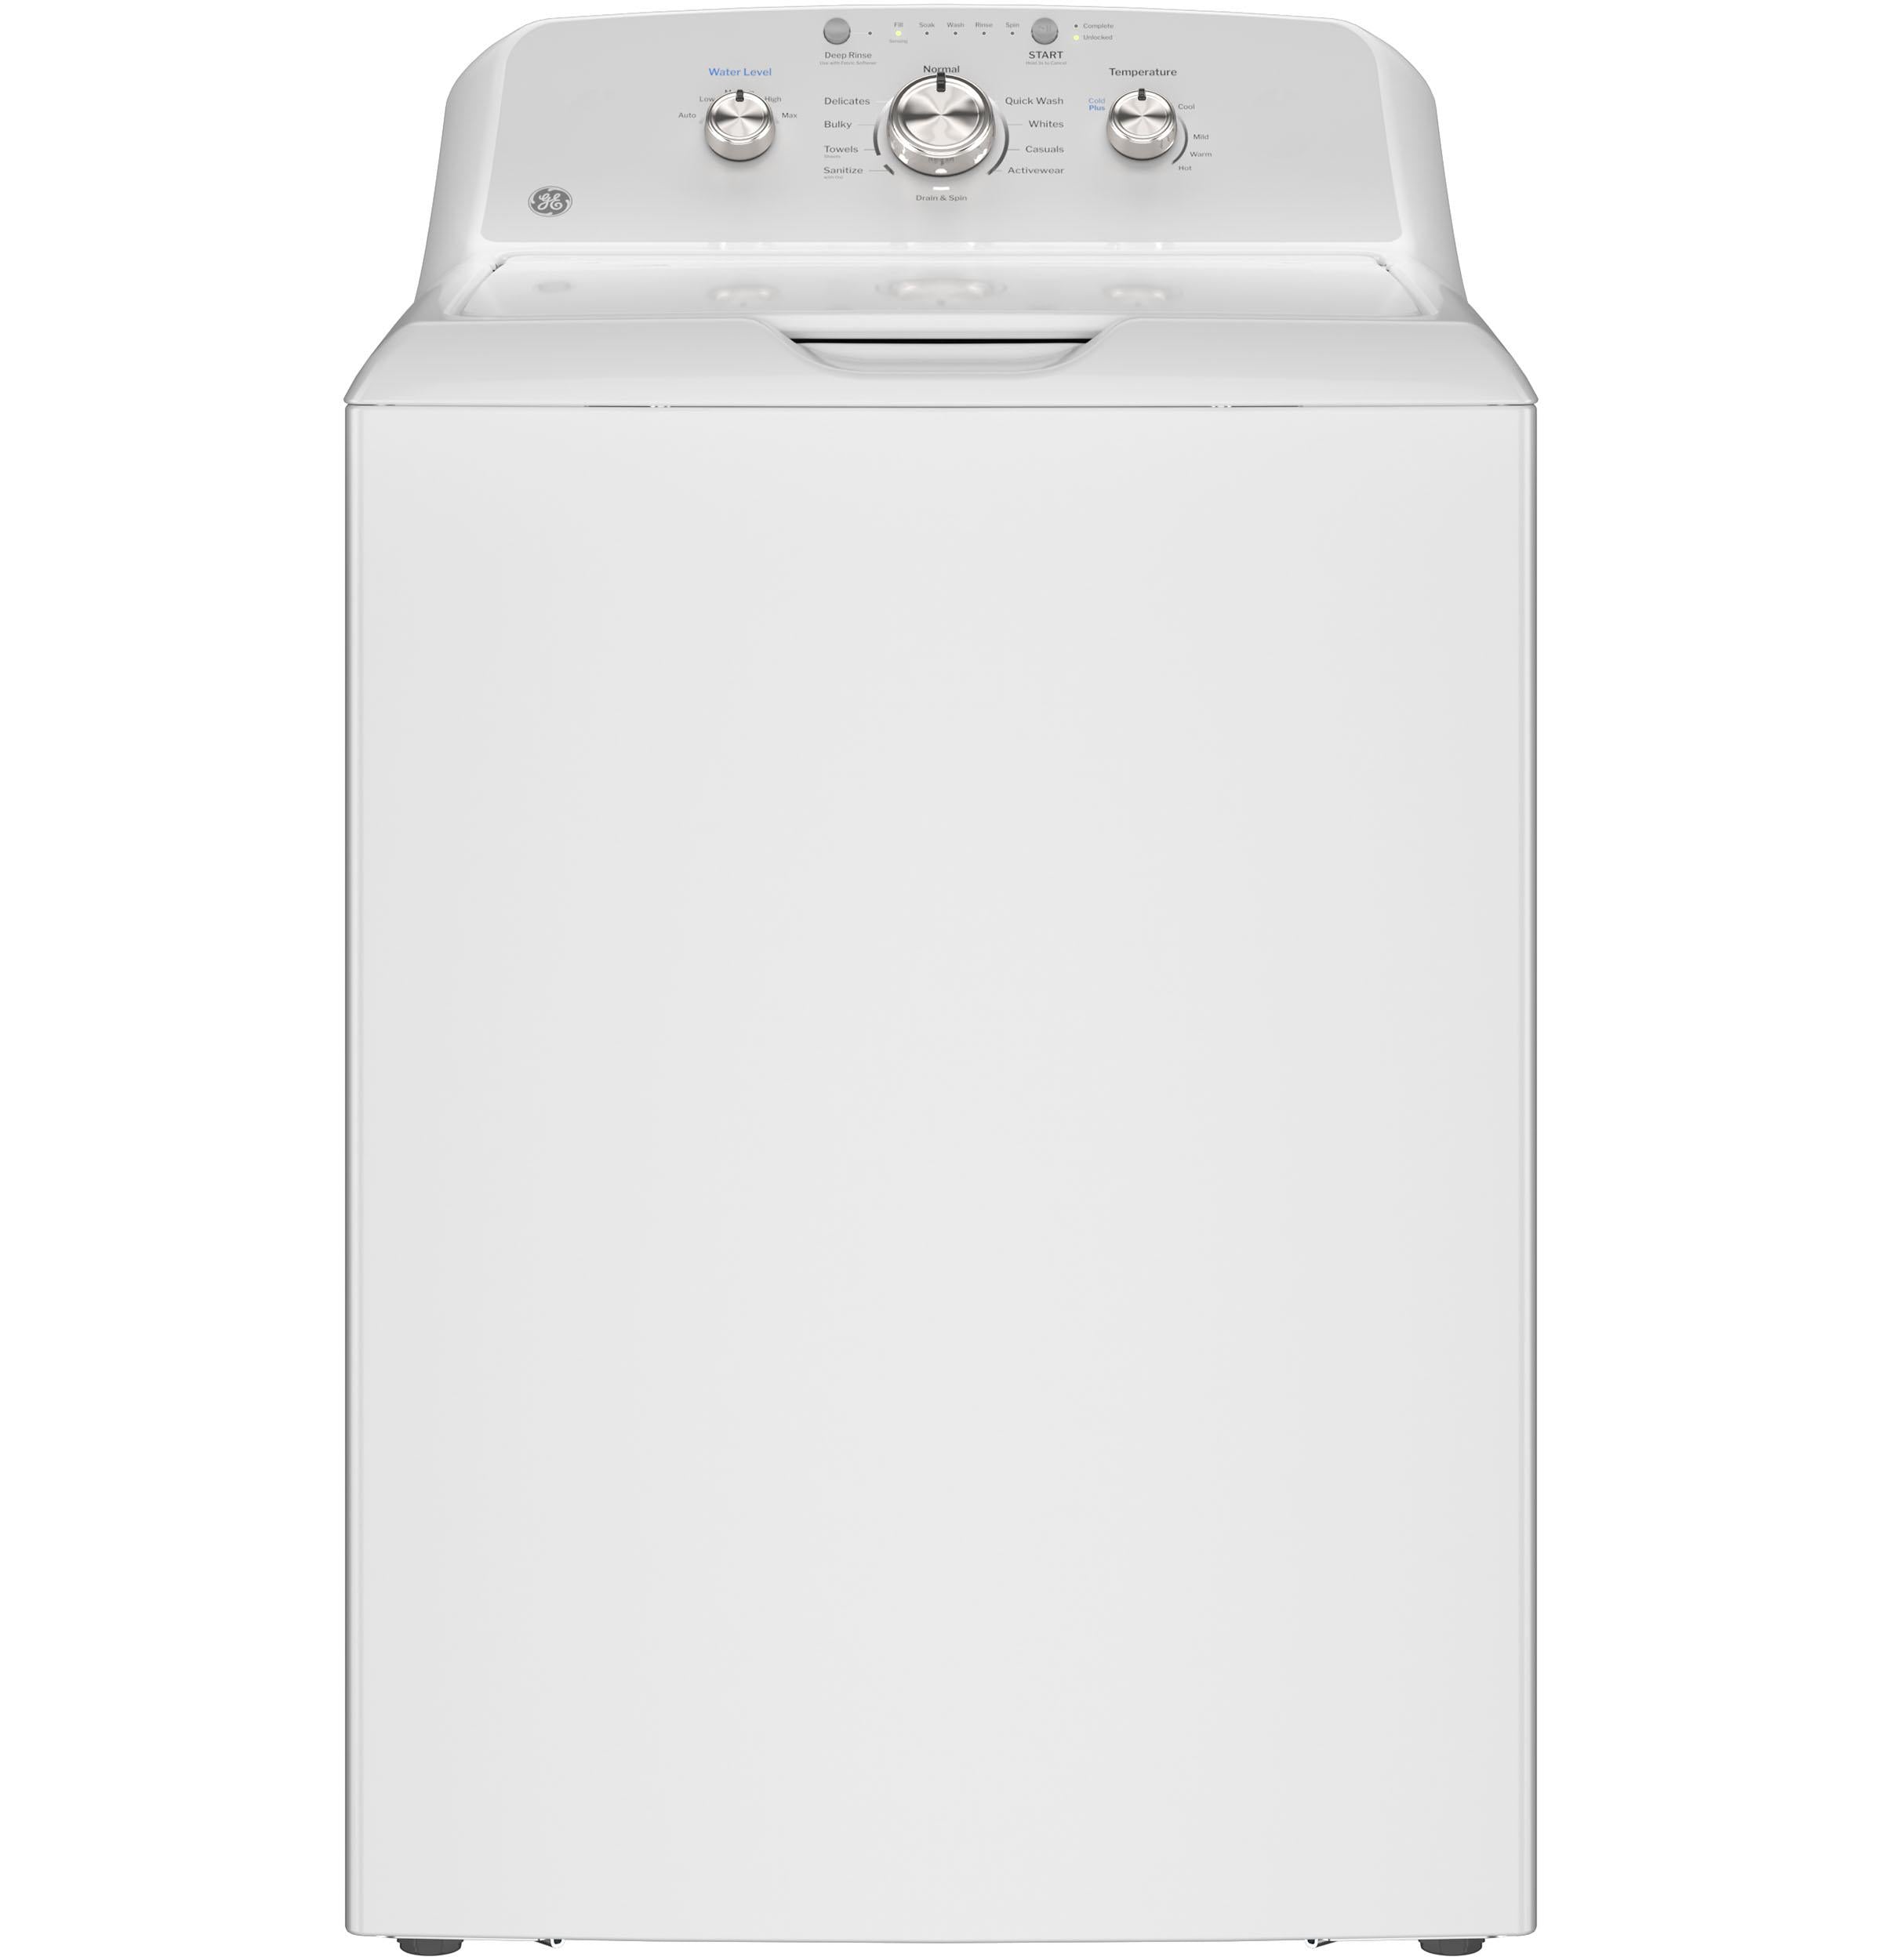 GE® 4.3 cu. ft. Capacity Washer with Stainless Steel